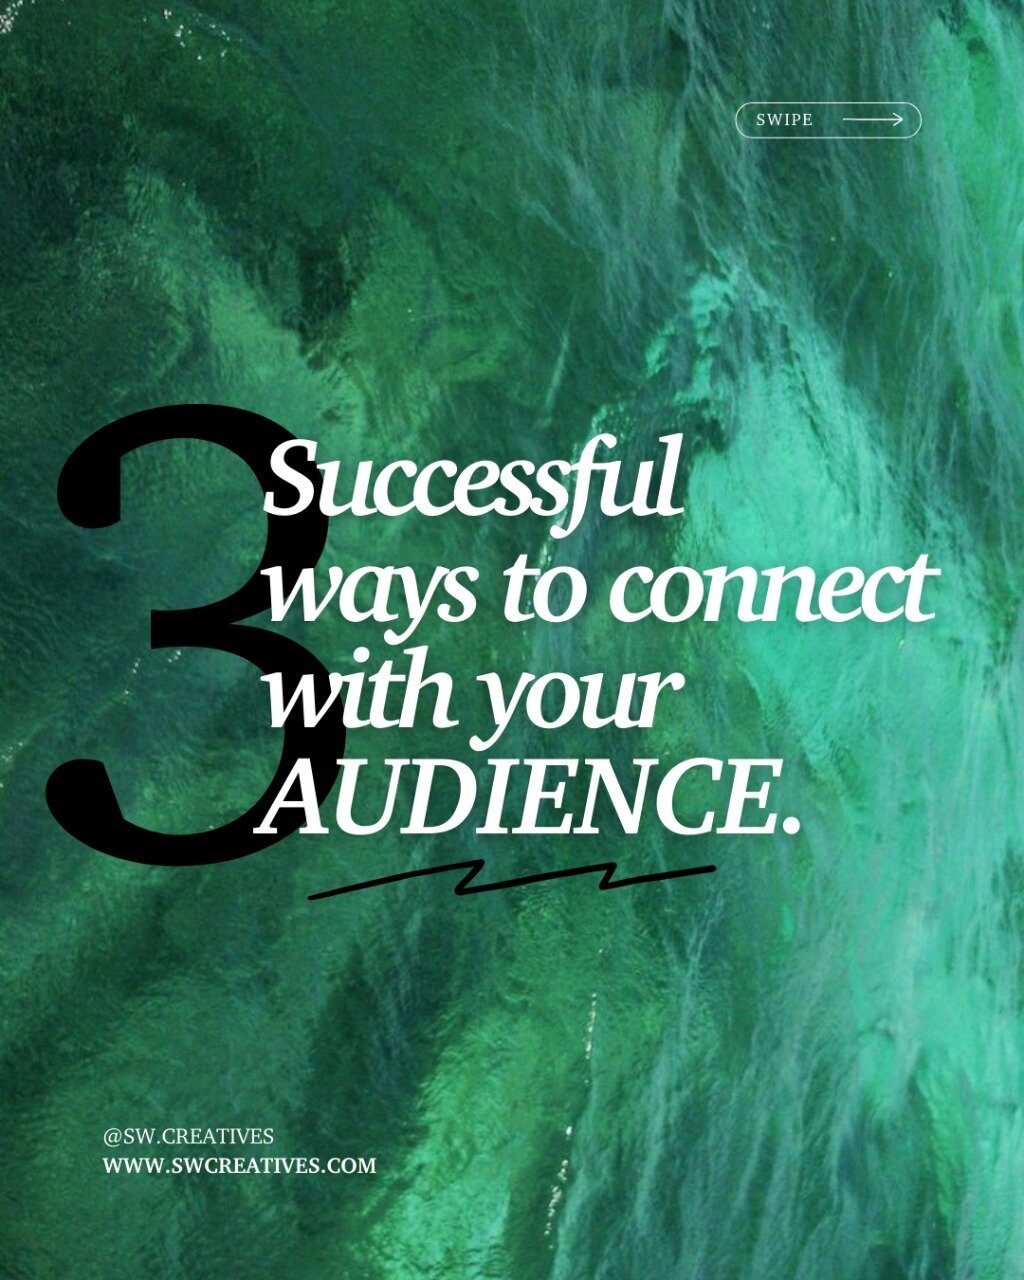 Swipe through our latest series where we reveal three successful strategies to forge stronger bonds with your audience! 💚

From the art of authentic storytelling to fostering meaningful interactions and delivering consistently valuable content, we'r